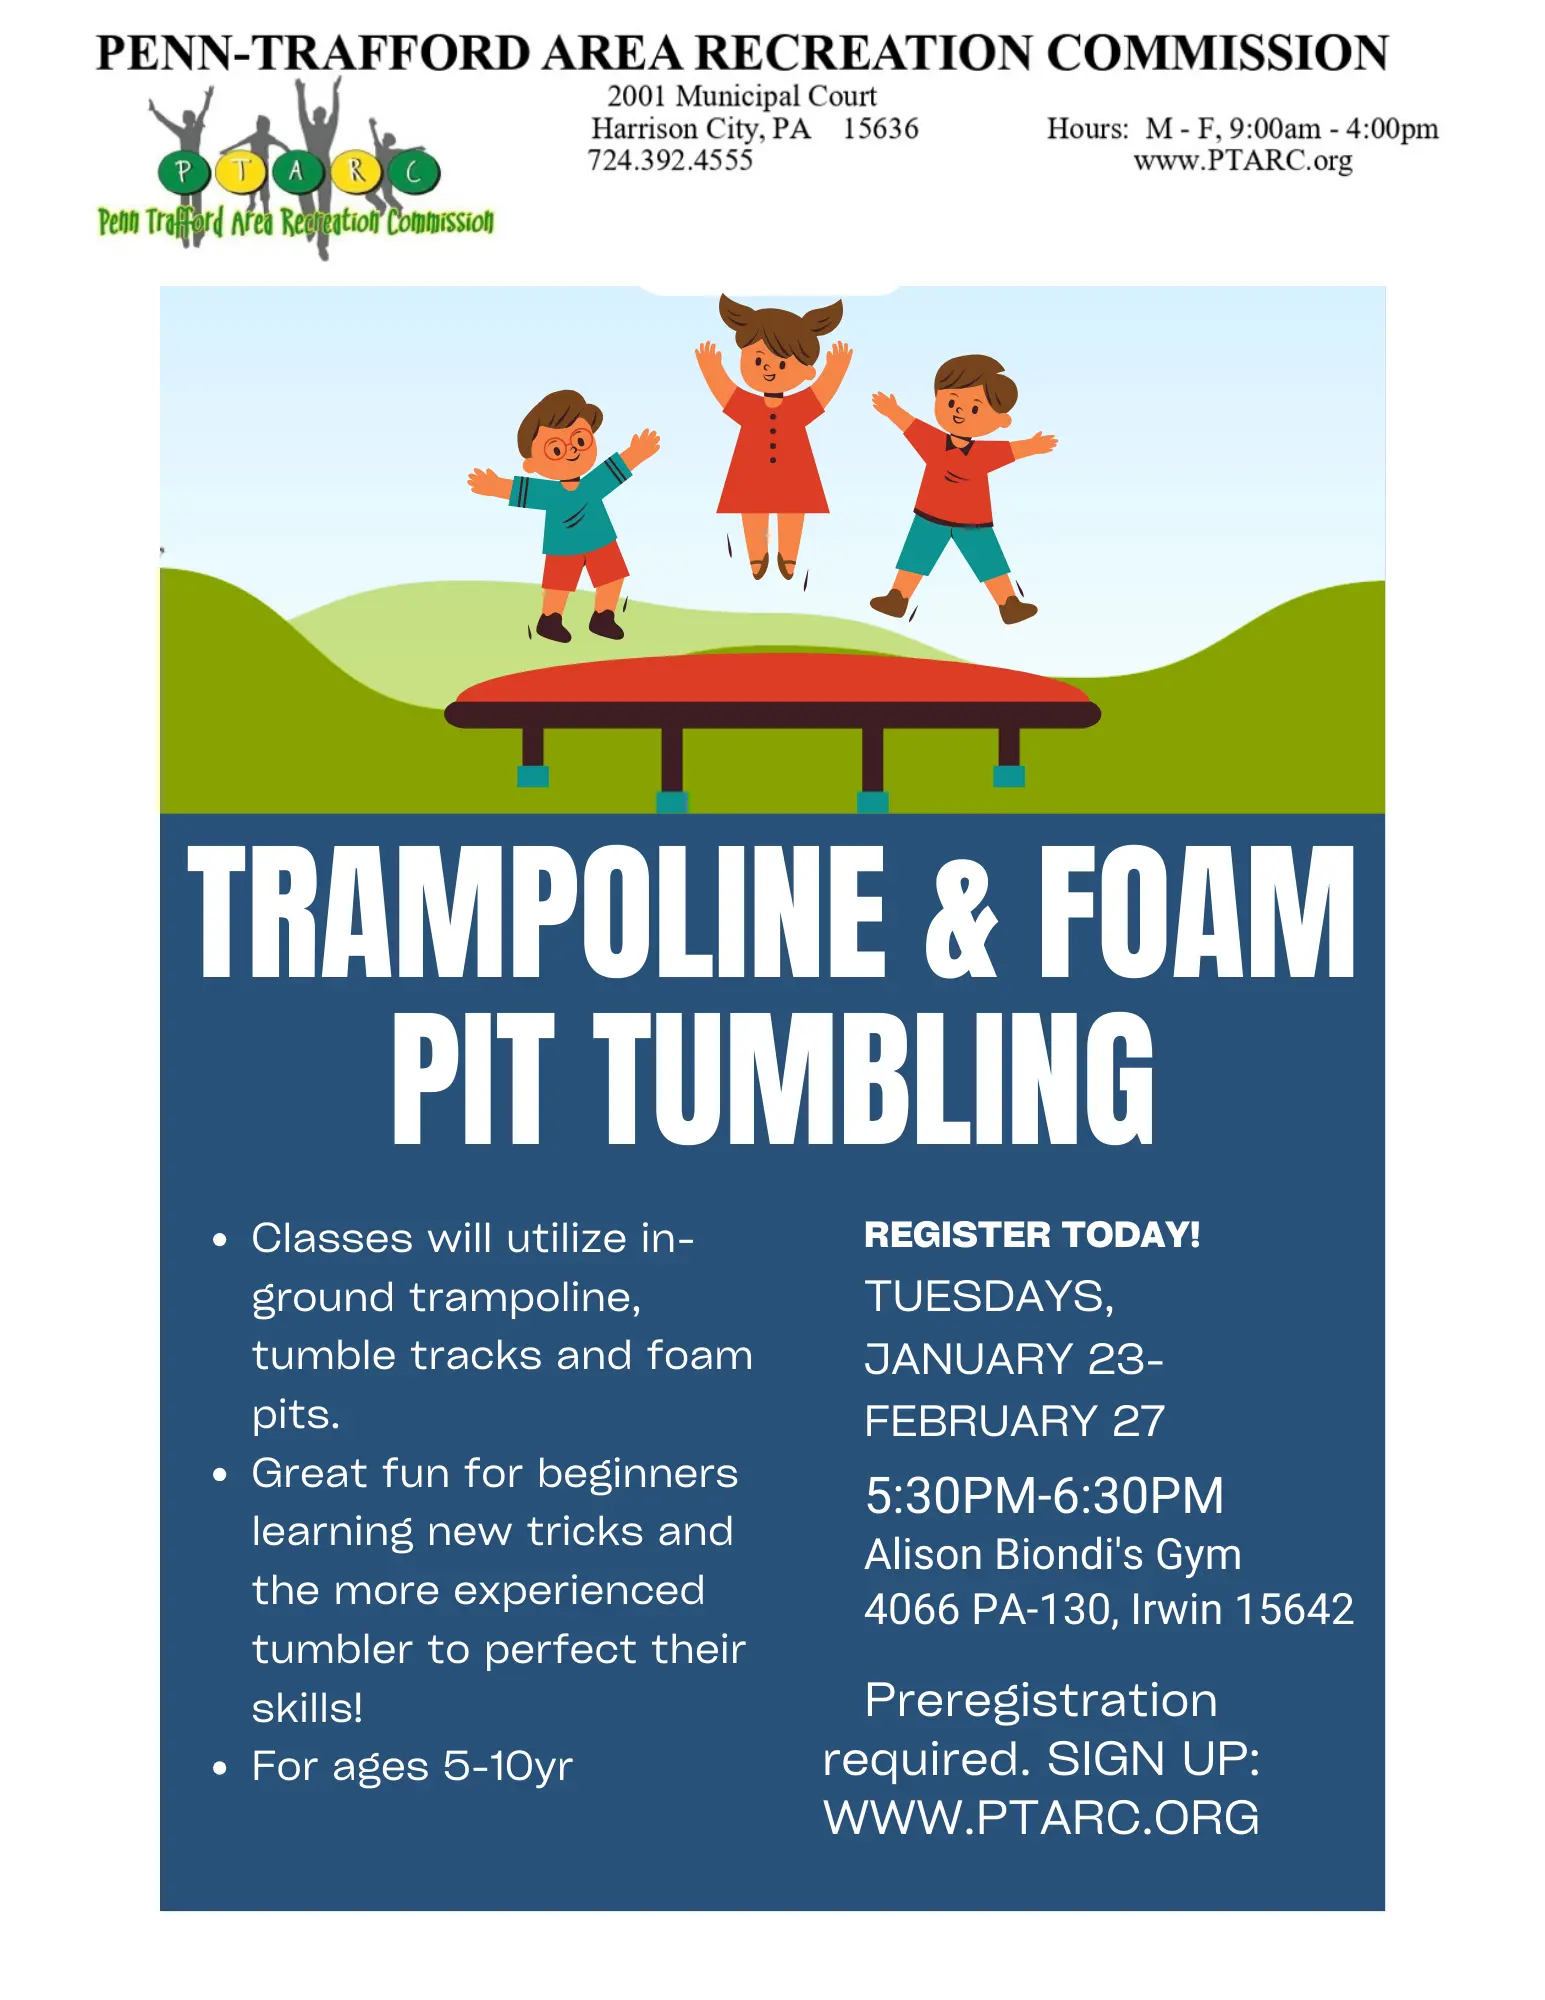 Copy of trampoline and foam pit